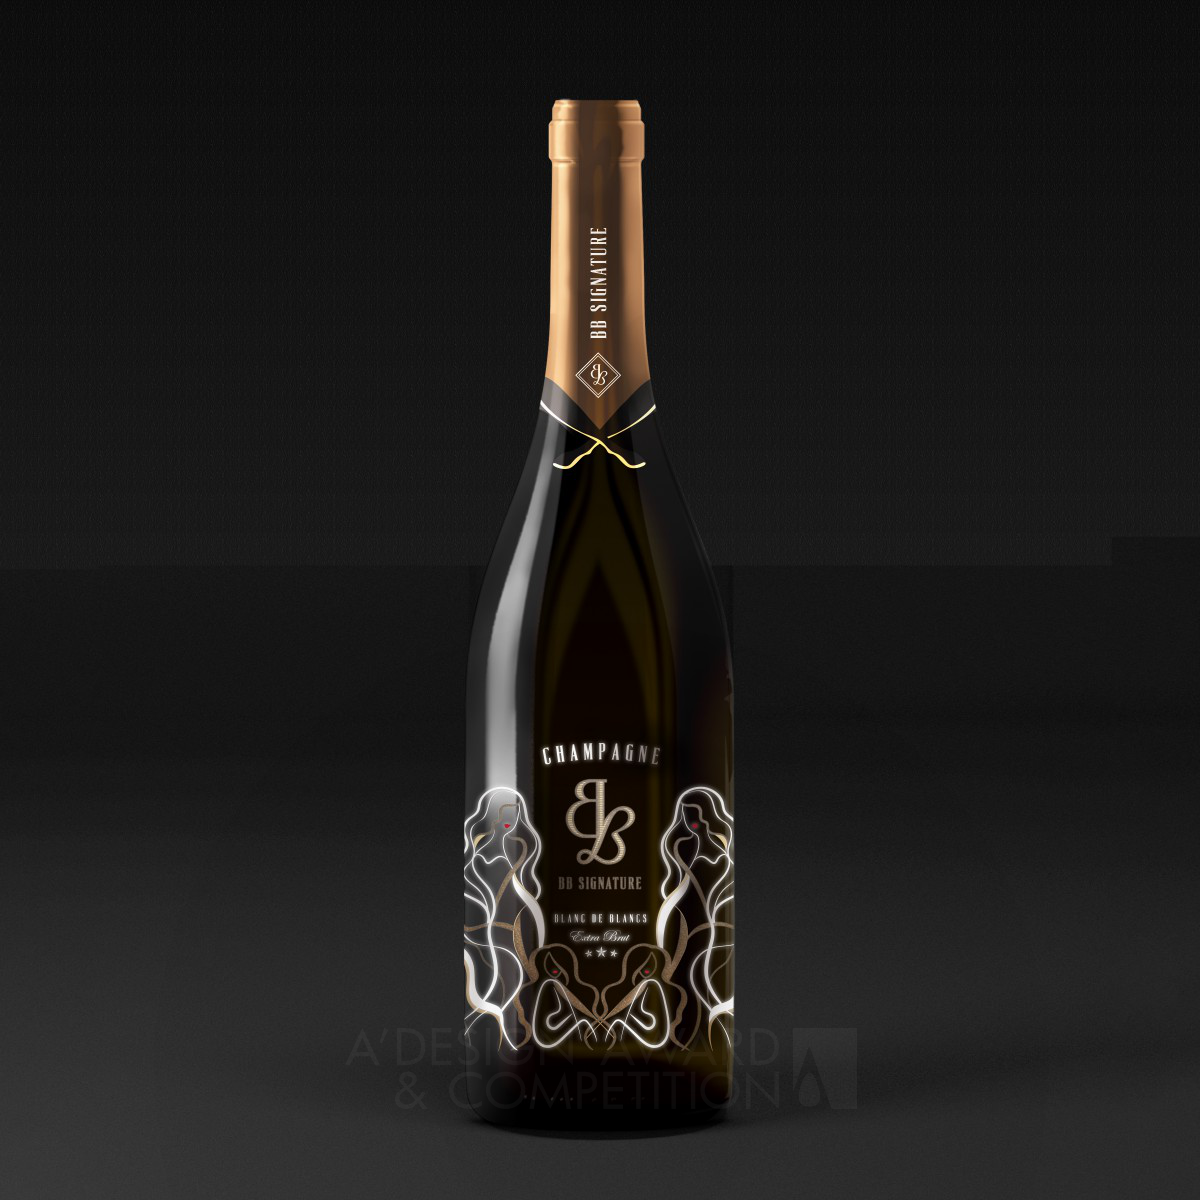 BB Signature Wine bottles by Ruth Chao